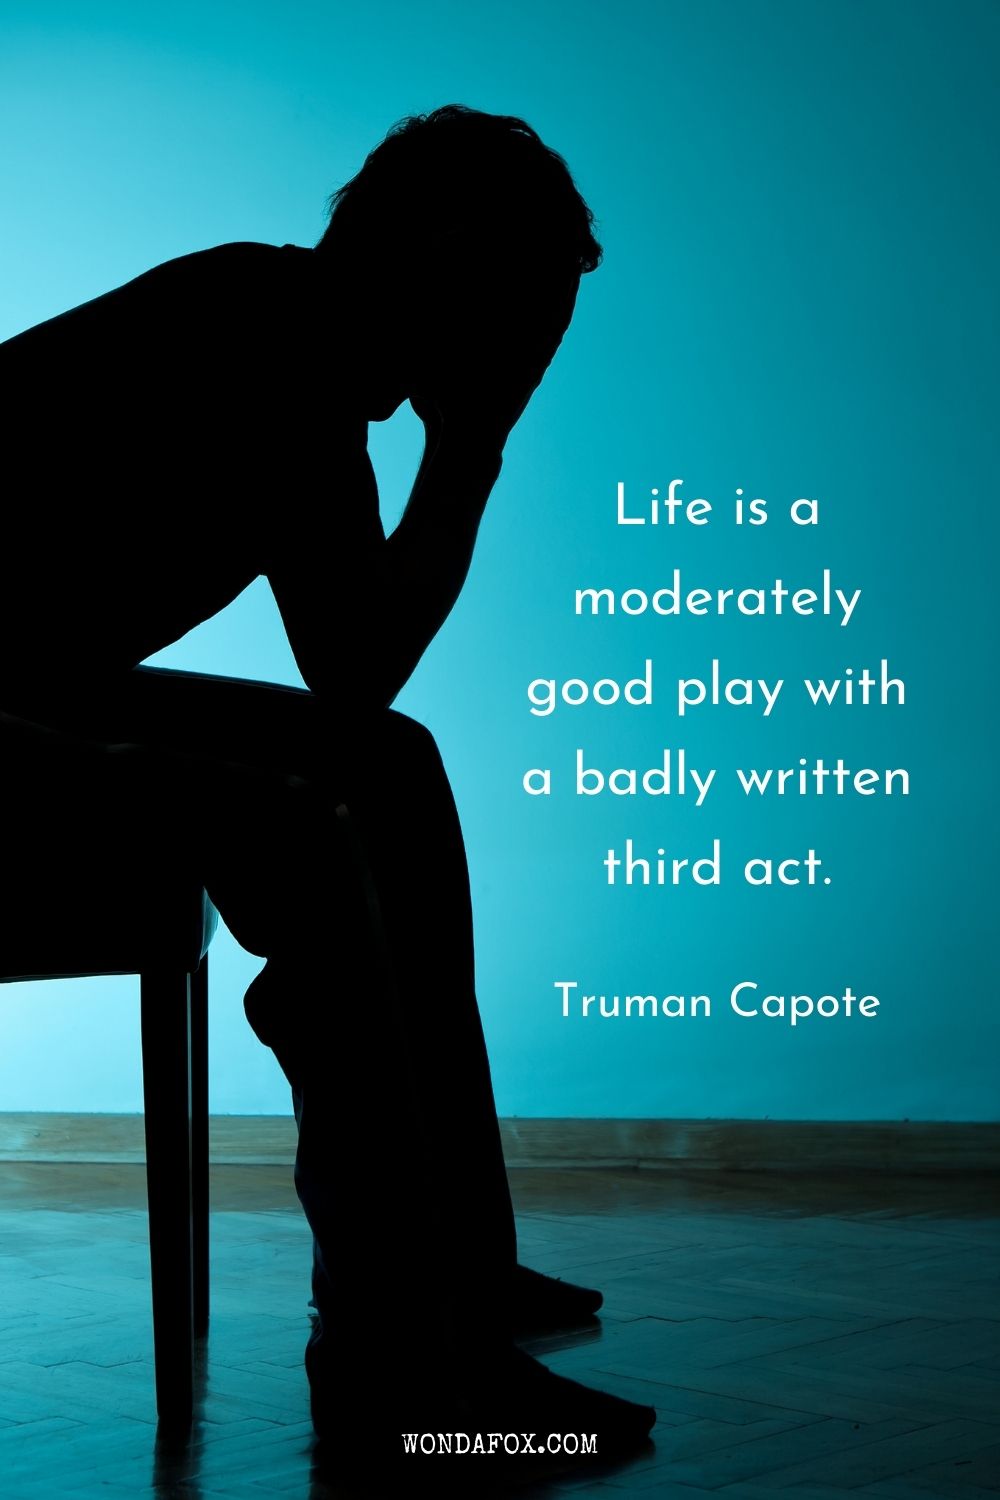 Life is a moderately good play with a badly written third act.